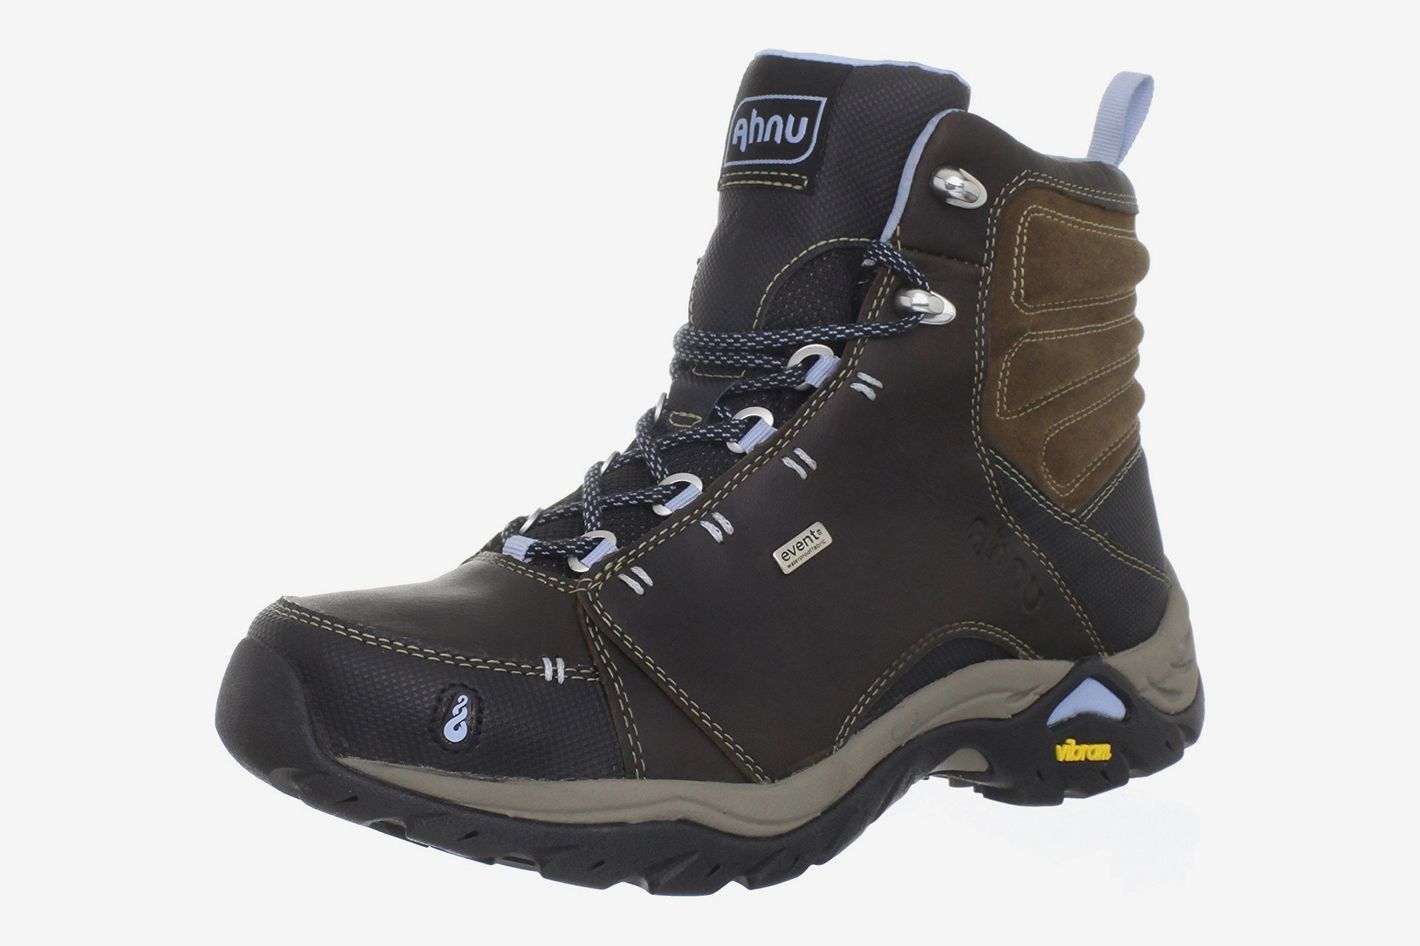 13 Best Hiking Boots for Women 2018